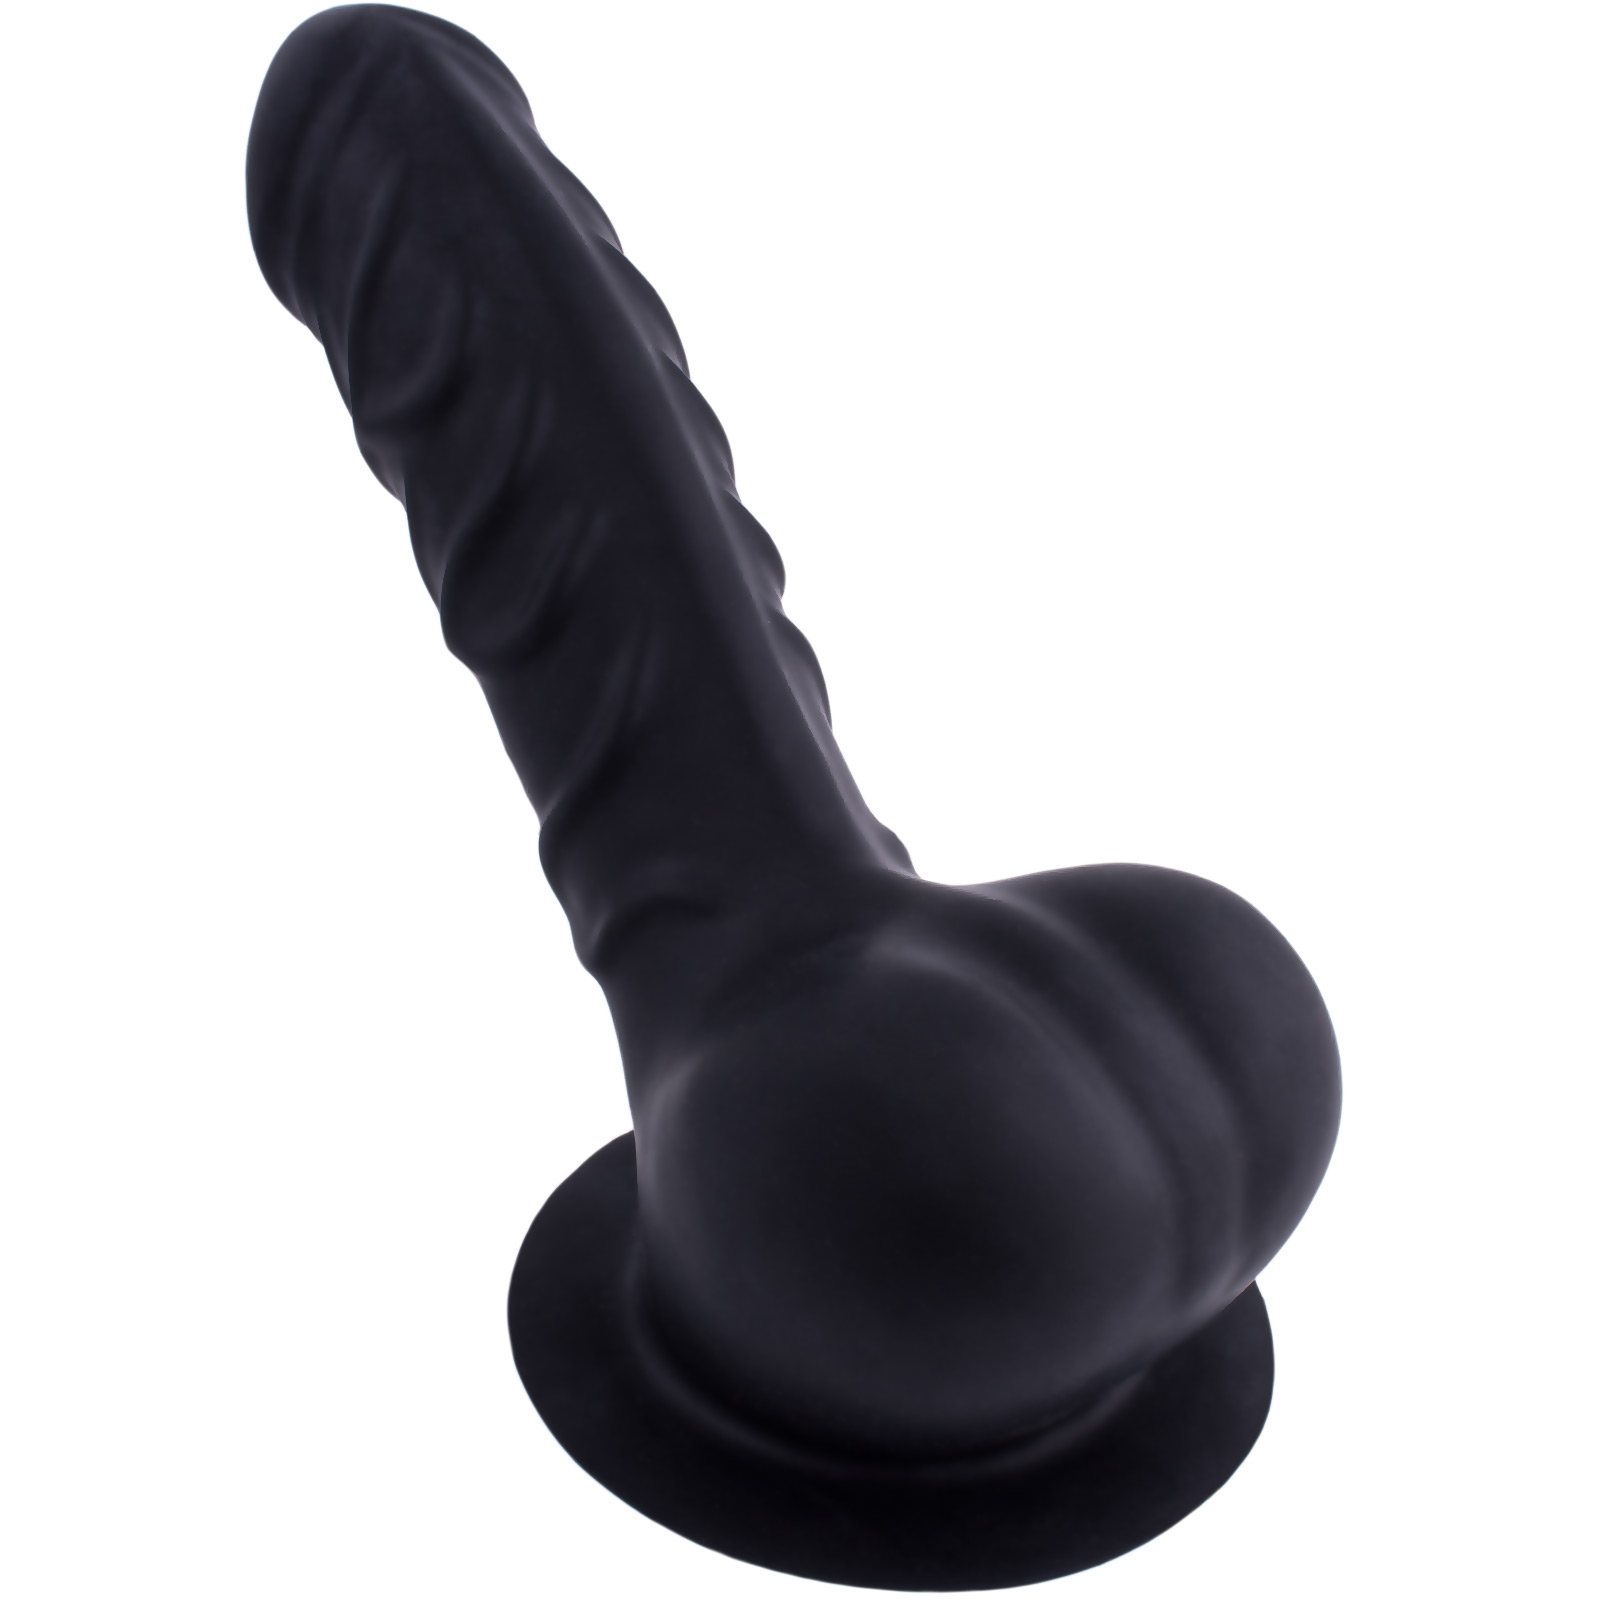 Toylie Latex Penis Sleeve «FRANZ» black, with base plate for sticking to latex clothing - suitable for vegans